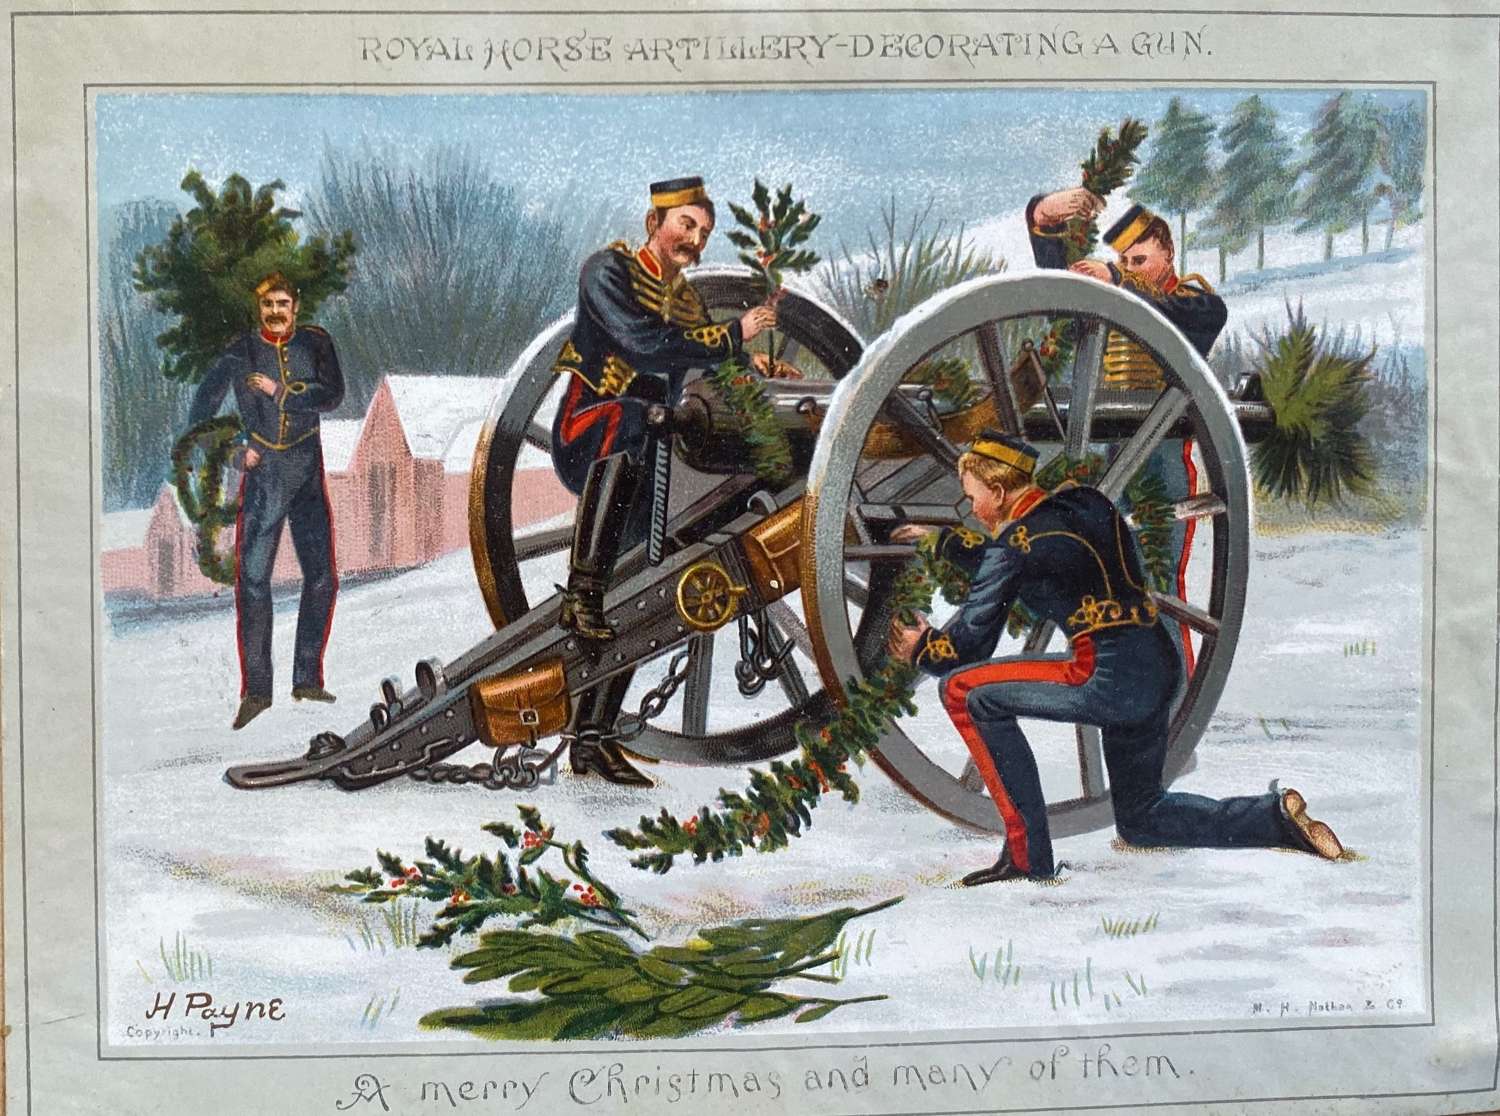 Coldstream Military Antiques Christmas Period Daily Briefing Updates